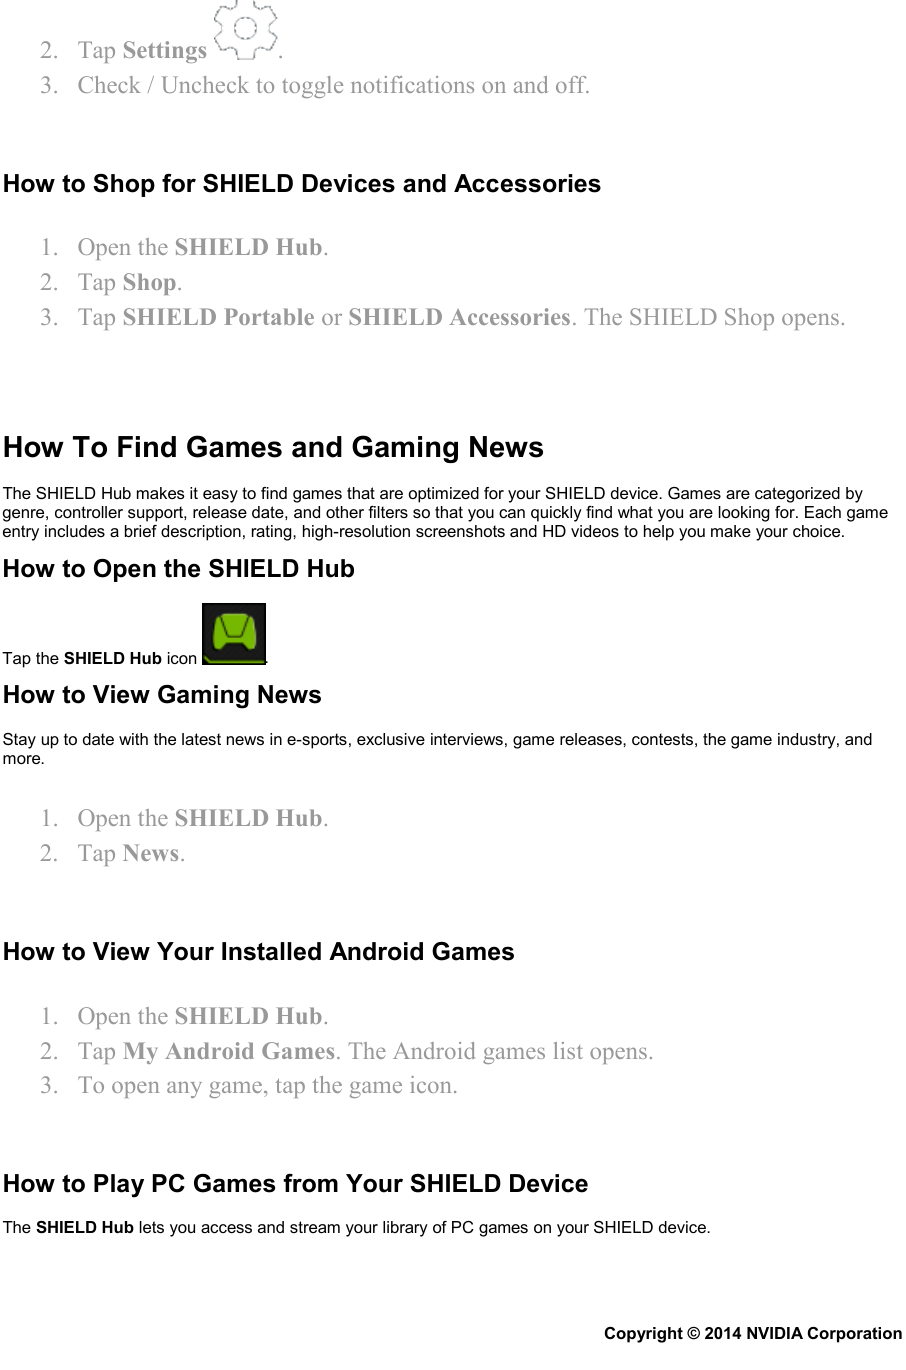 2. Tap Settings  . 3. Check / Uncheck to toggle notifications on and off.   How to Shop for SHIELD Devices and Accessories 1. Open the SHIELD Hub. 2. Tap Shop. 3. Tap SHIELD Portable or SHIELD Accessories. The SHIELD Shop opens.    How To Find Games and Gaming News  The SHIELD Hub makes it easy to find games that are optimized for your SHIELD device. Games are categorized by genre, controller support, release date, and other filters so that you can quickly find what you are looking for. Each game entry includes a brief description, rating, high-resolution screenshots and HD videos to help you make your choice. How to Open the SHIELD Hub Tap the SHIELD Hub icon  . How to View Gaming News Stay up to date with the latest news in e-sports, exclusive interviews, game releases, contests, the game industry, and more. 1. Open the SHIELD Hub. 2. Tap News.   How to View Your Installed Android Games 1. Open the SHIELD Hub. 2. Tap My Android Games. The Android games list opens. 3. To open any game, tap the game icon.   How to Play PC Games from Your SHIELD Device The SHIELD Hub lets you access and stream your library of PC games on your SHIELD device. Copyright © 2014 NVIDIA Corporation   